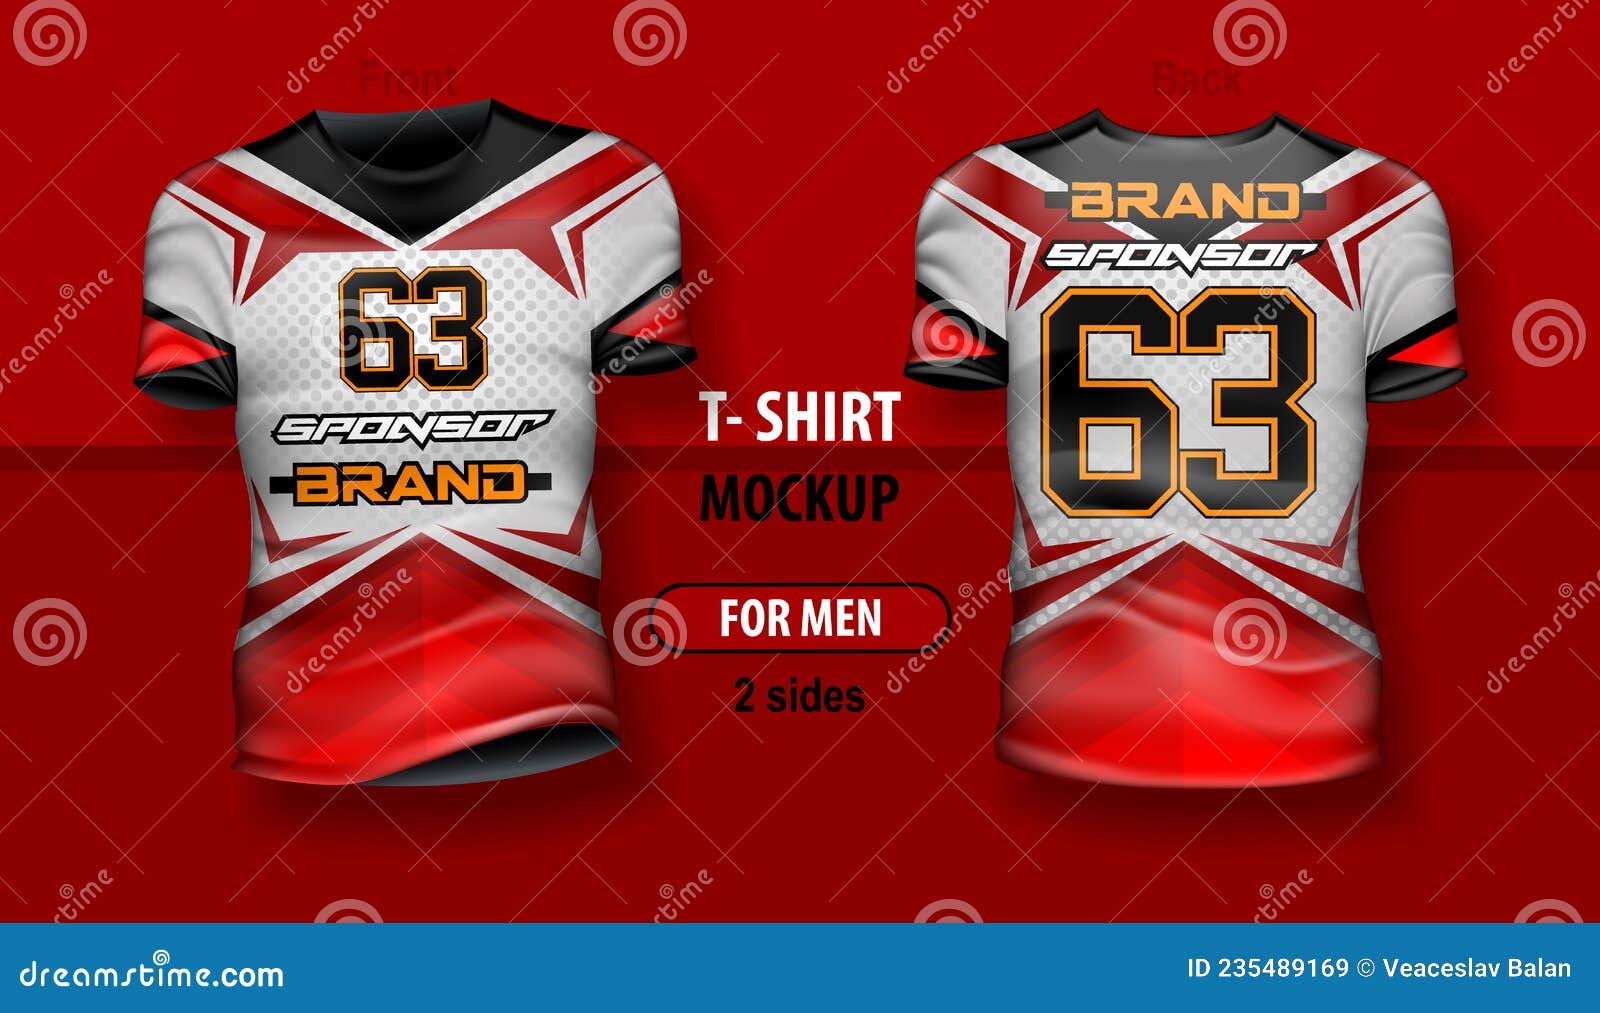 printed sports T-shirt/jersey for men